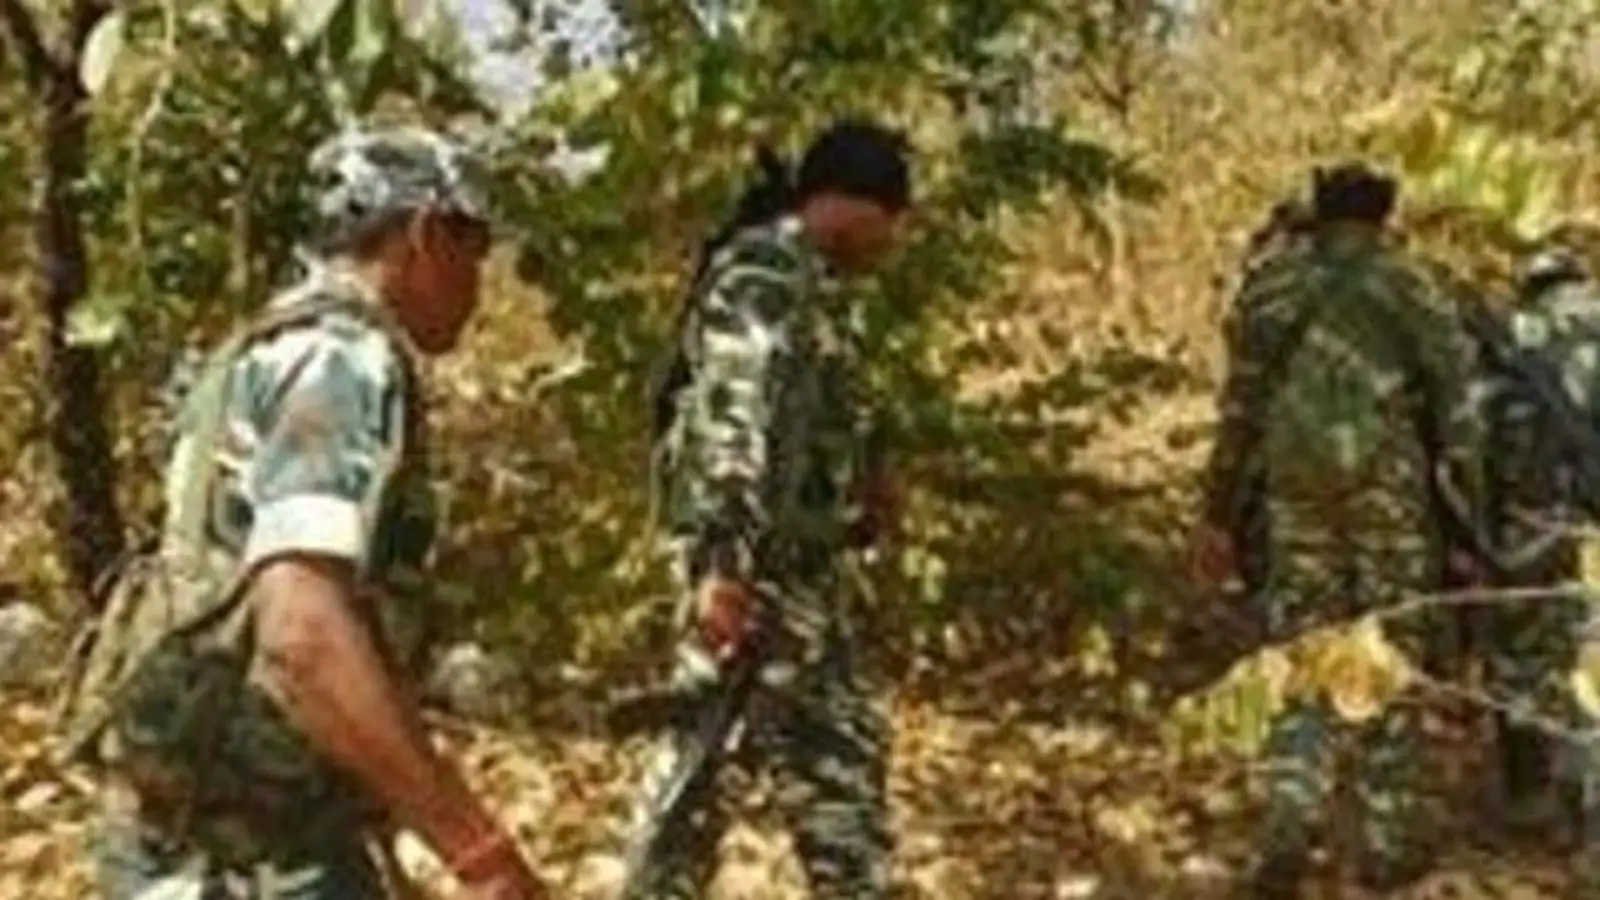 Afternoon brief: Maoist platoon commander with ₹3L bounty killed in encounter in Chhattisgarh and all the latest news